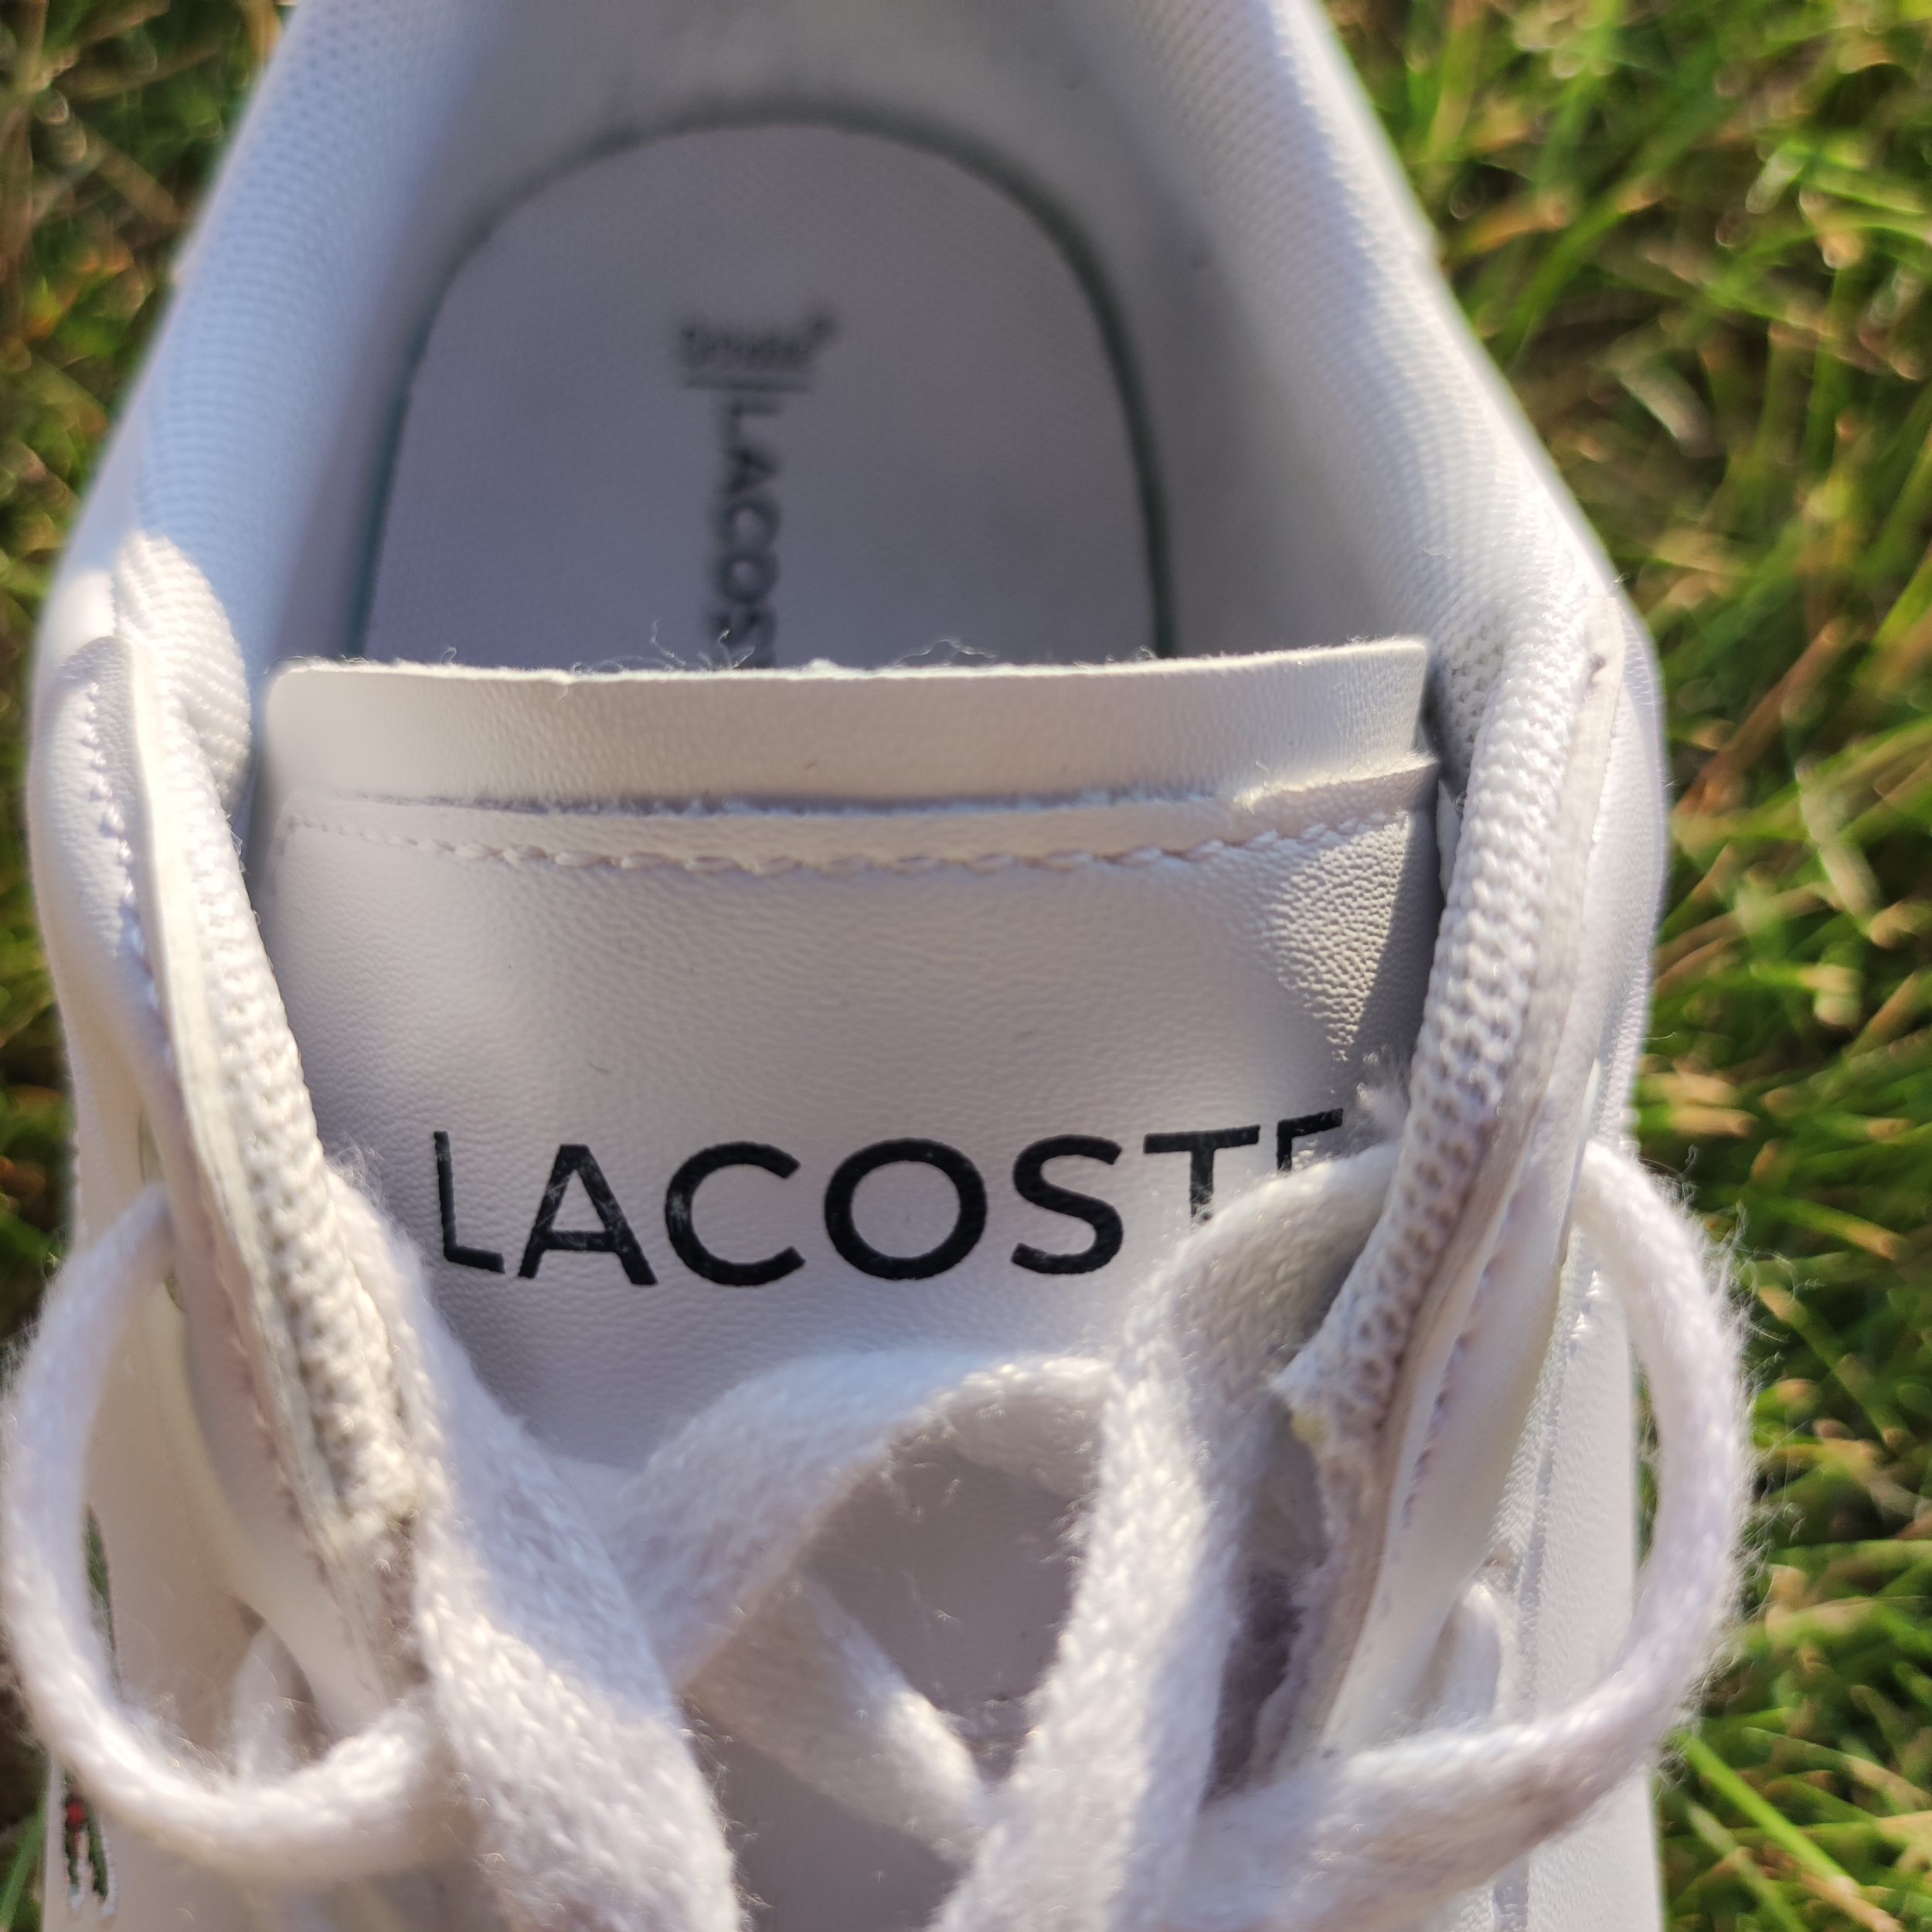 Lacoste Hydez shoes